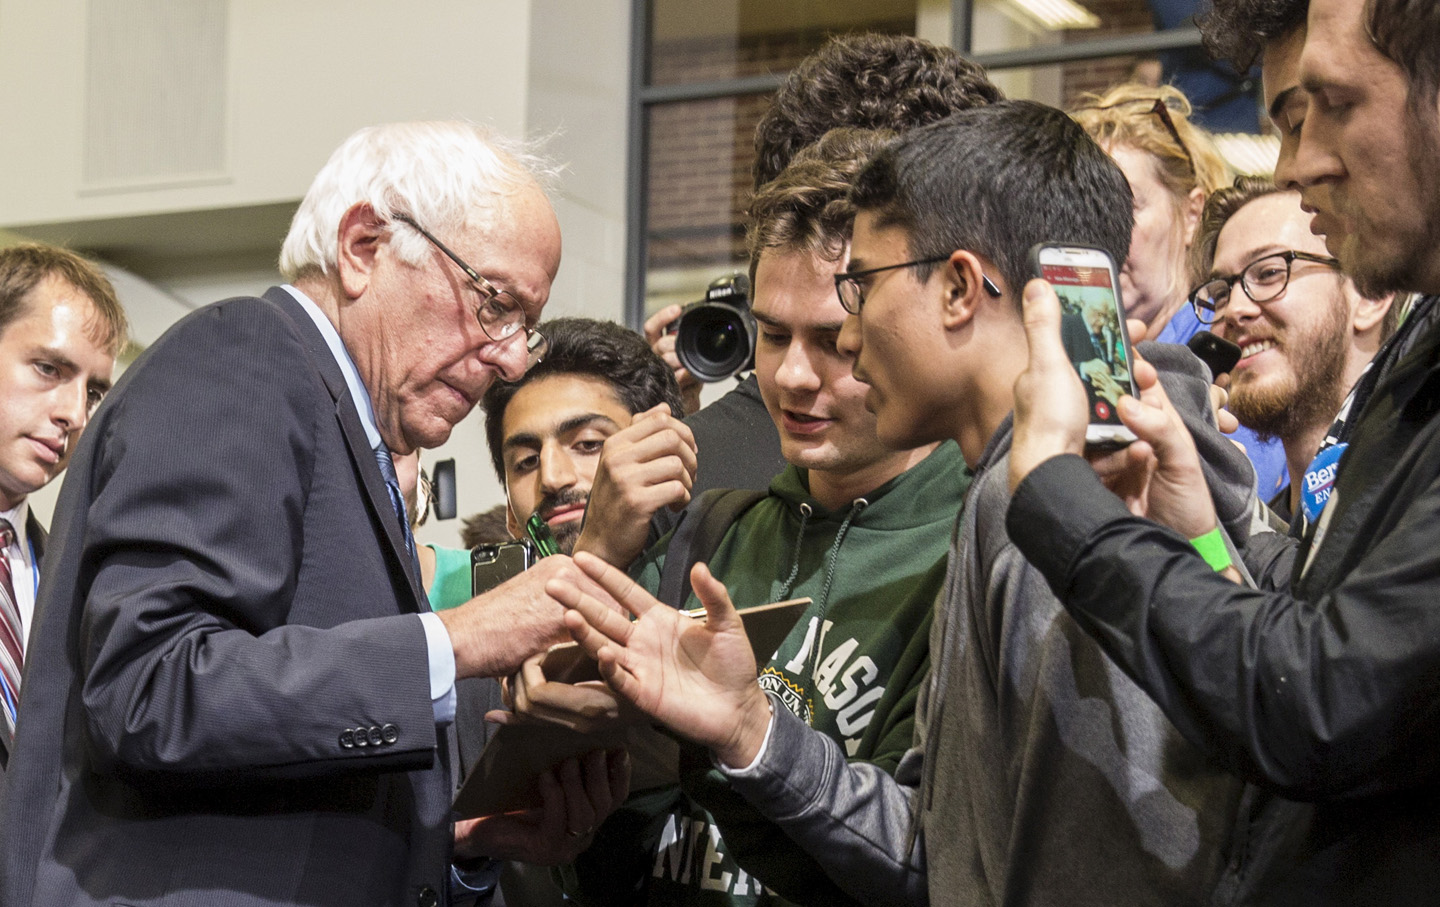 Democratic presidential candidate Sanders greets students after a town hall meeting with students at George Mason University in Fairfax